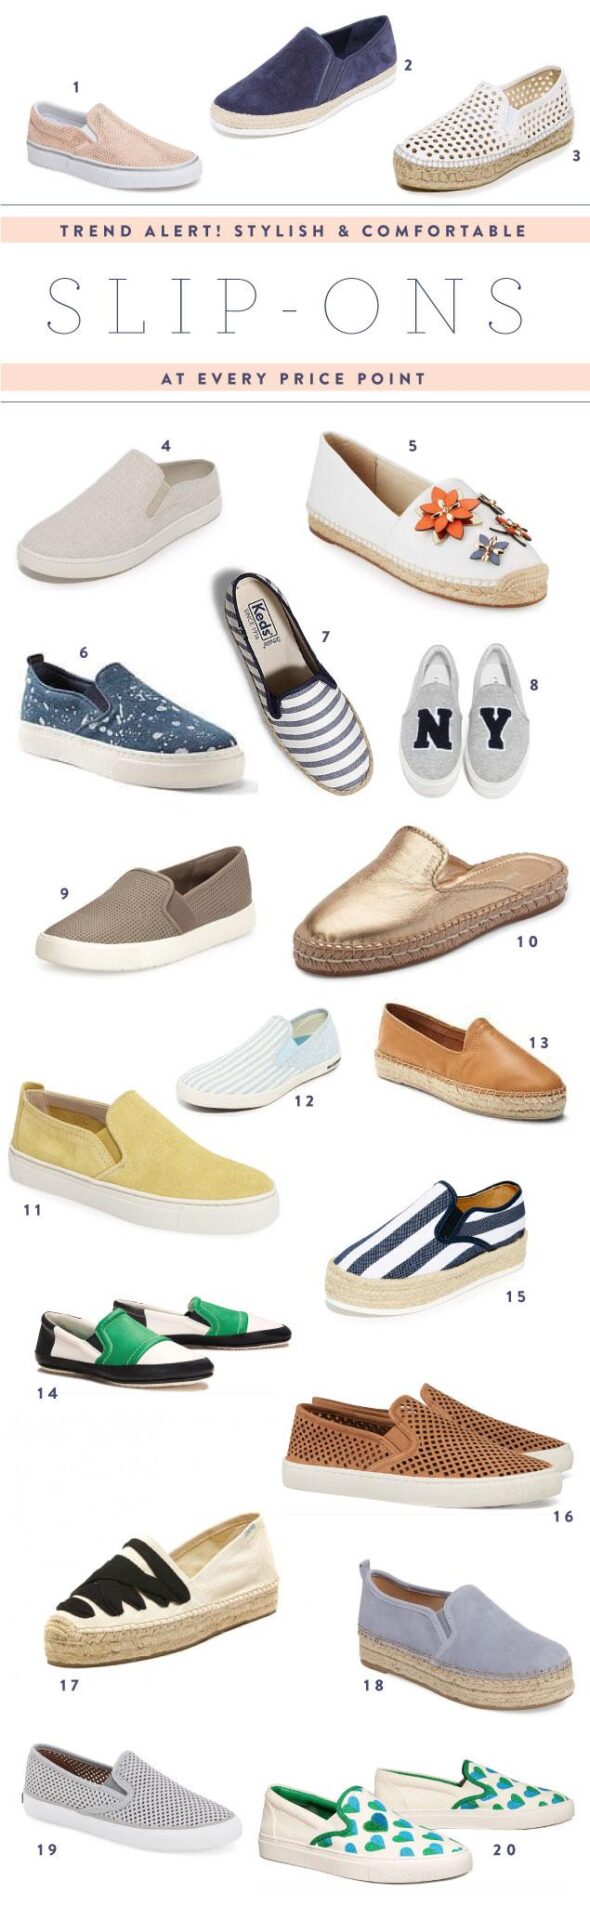 www.pencilshavingsstudio.com Slip-on sneakers are a stylish and comfortable shoe available at every price point an in a wide variety of colors.